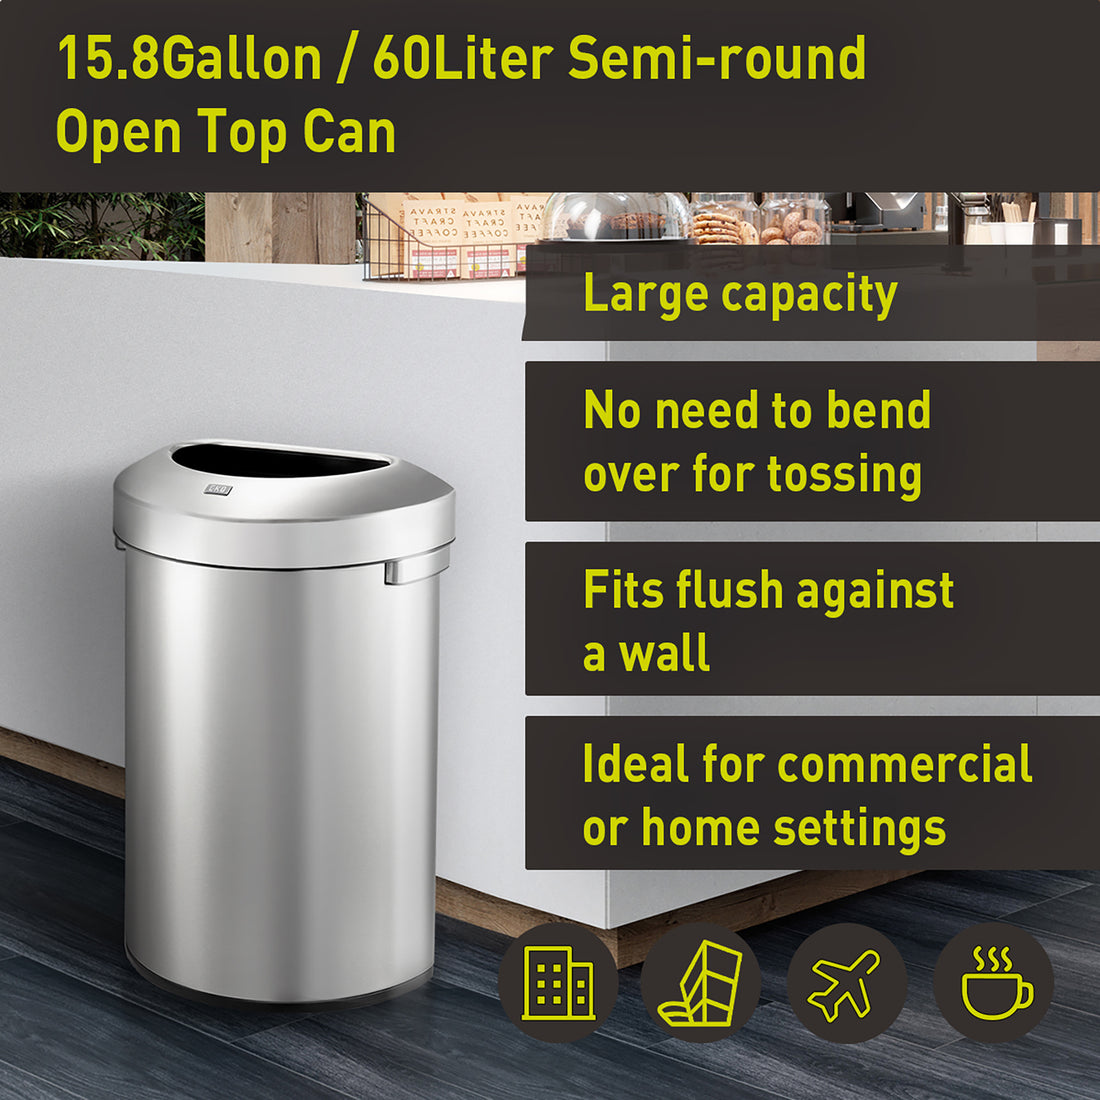 Urban Semi-Round Open Top Can Commercial Grade – 60L / 16 Gal